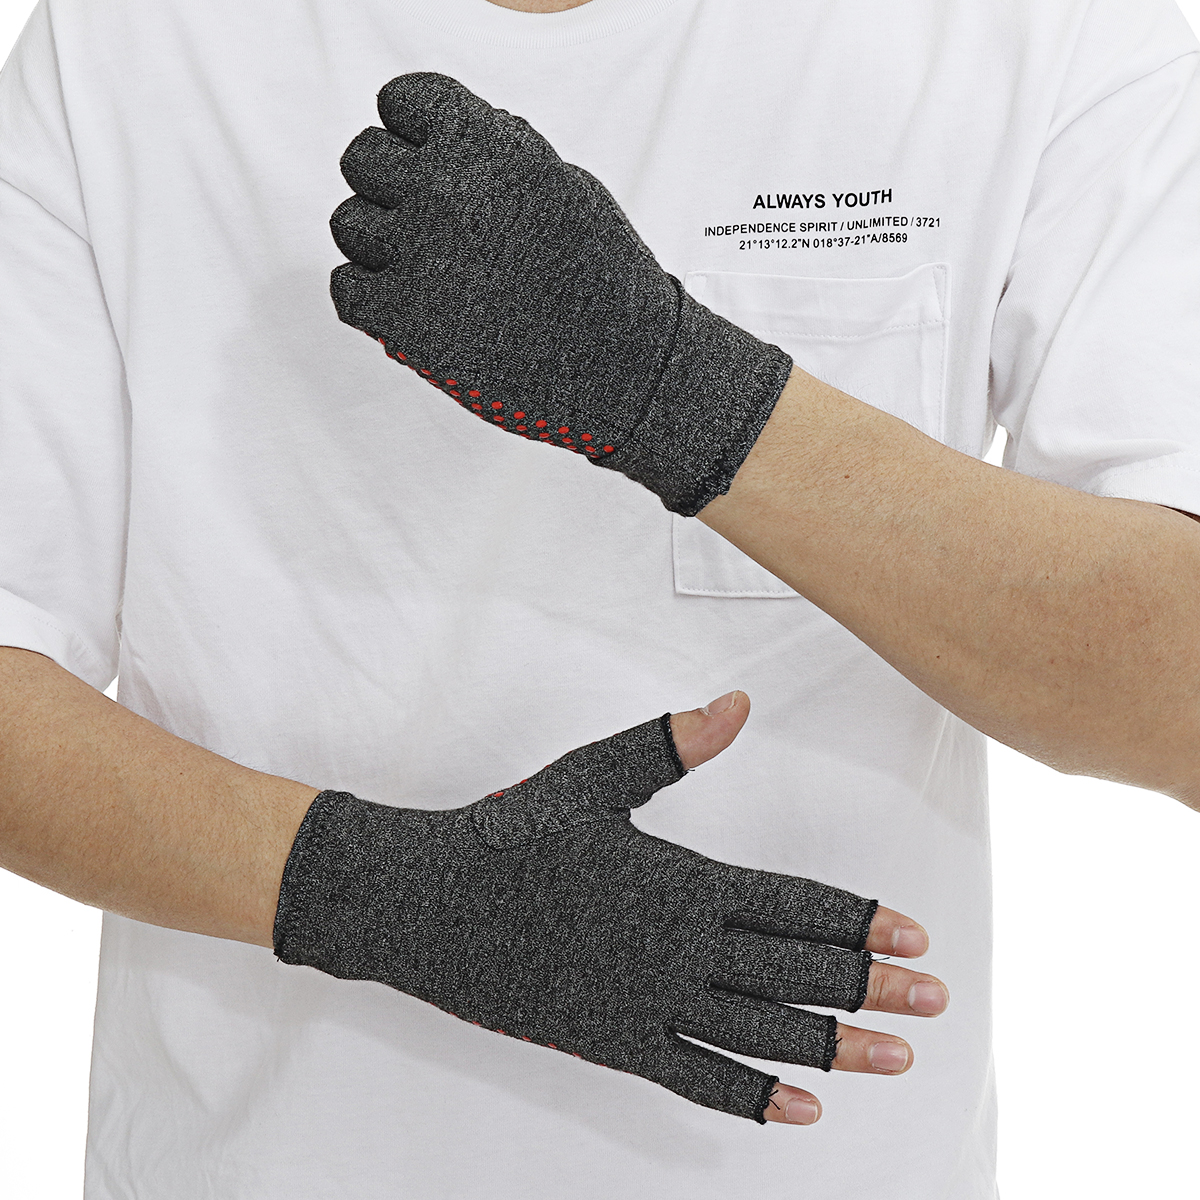 1-Pair-Compression-Arthritis-Gloves-Arthritic-Joint-Pain-Relief-Hand-Gloves-Therapy-Open-Fingers-Com-1777634-9